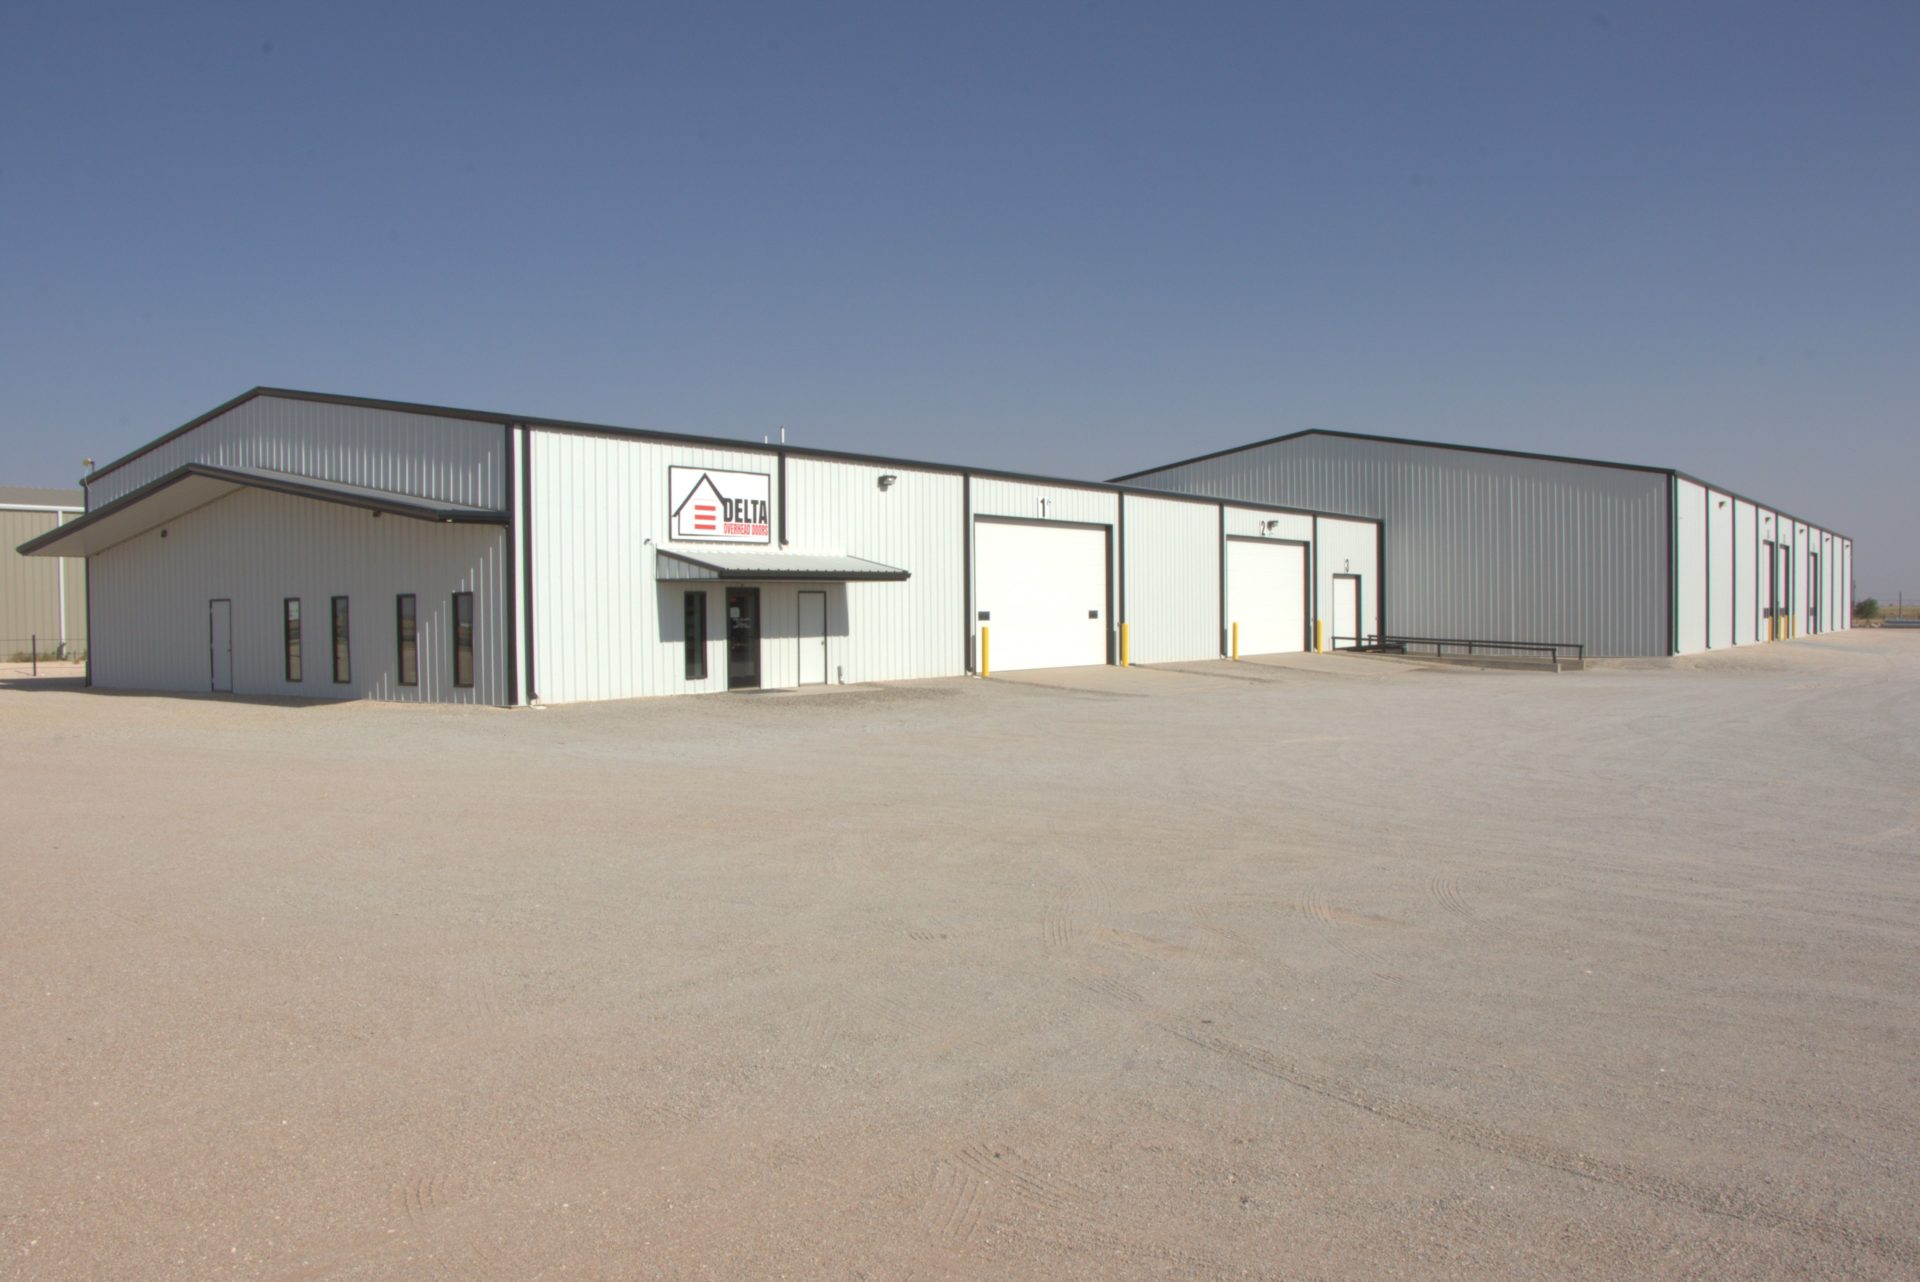 Two metal commercial buildings, one with two white overhead doors